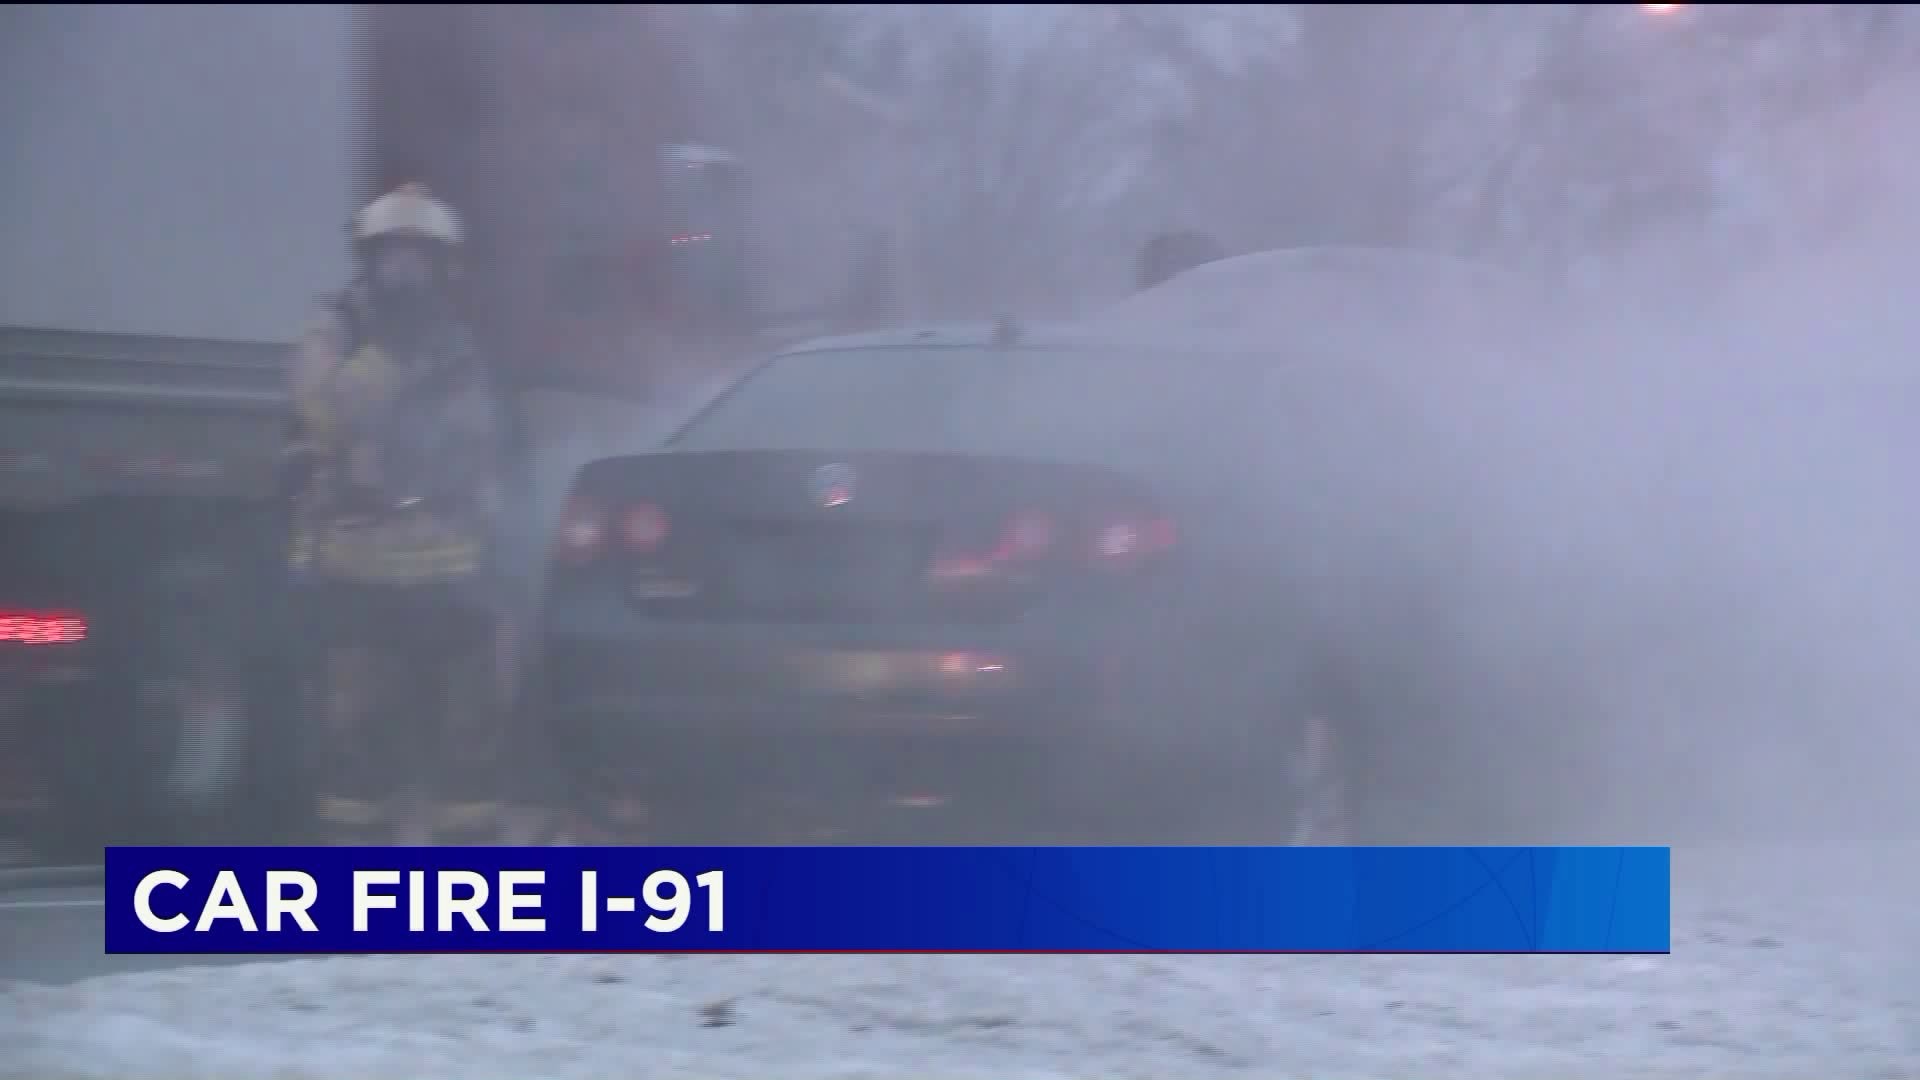 Car fire on I-91 NB in Enfield